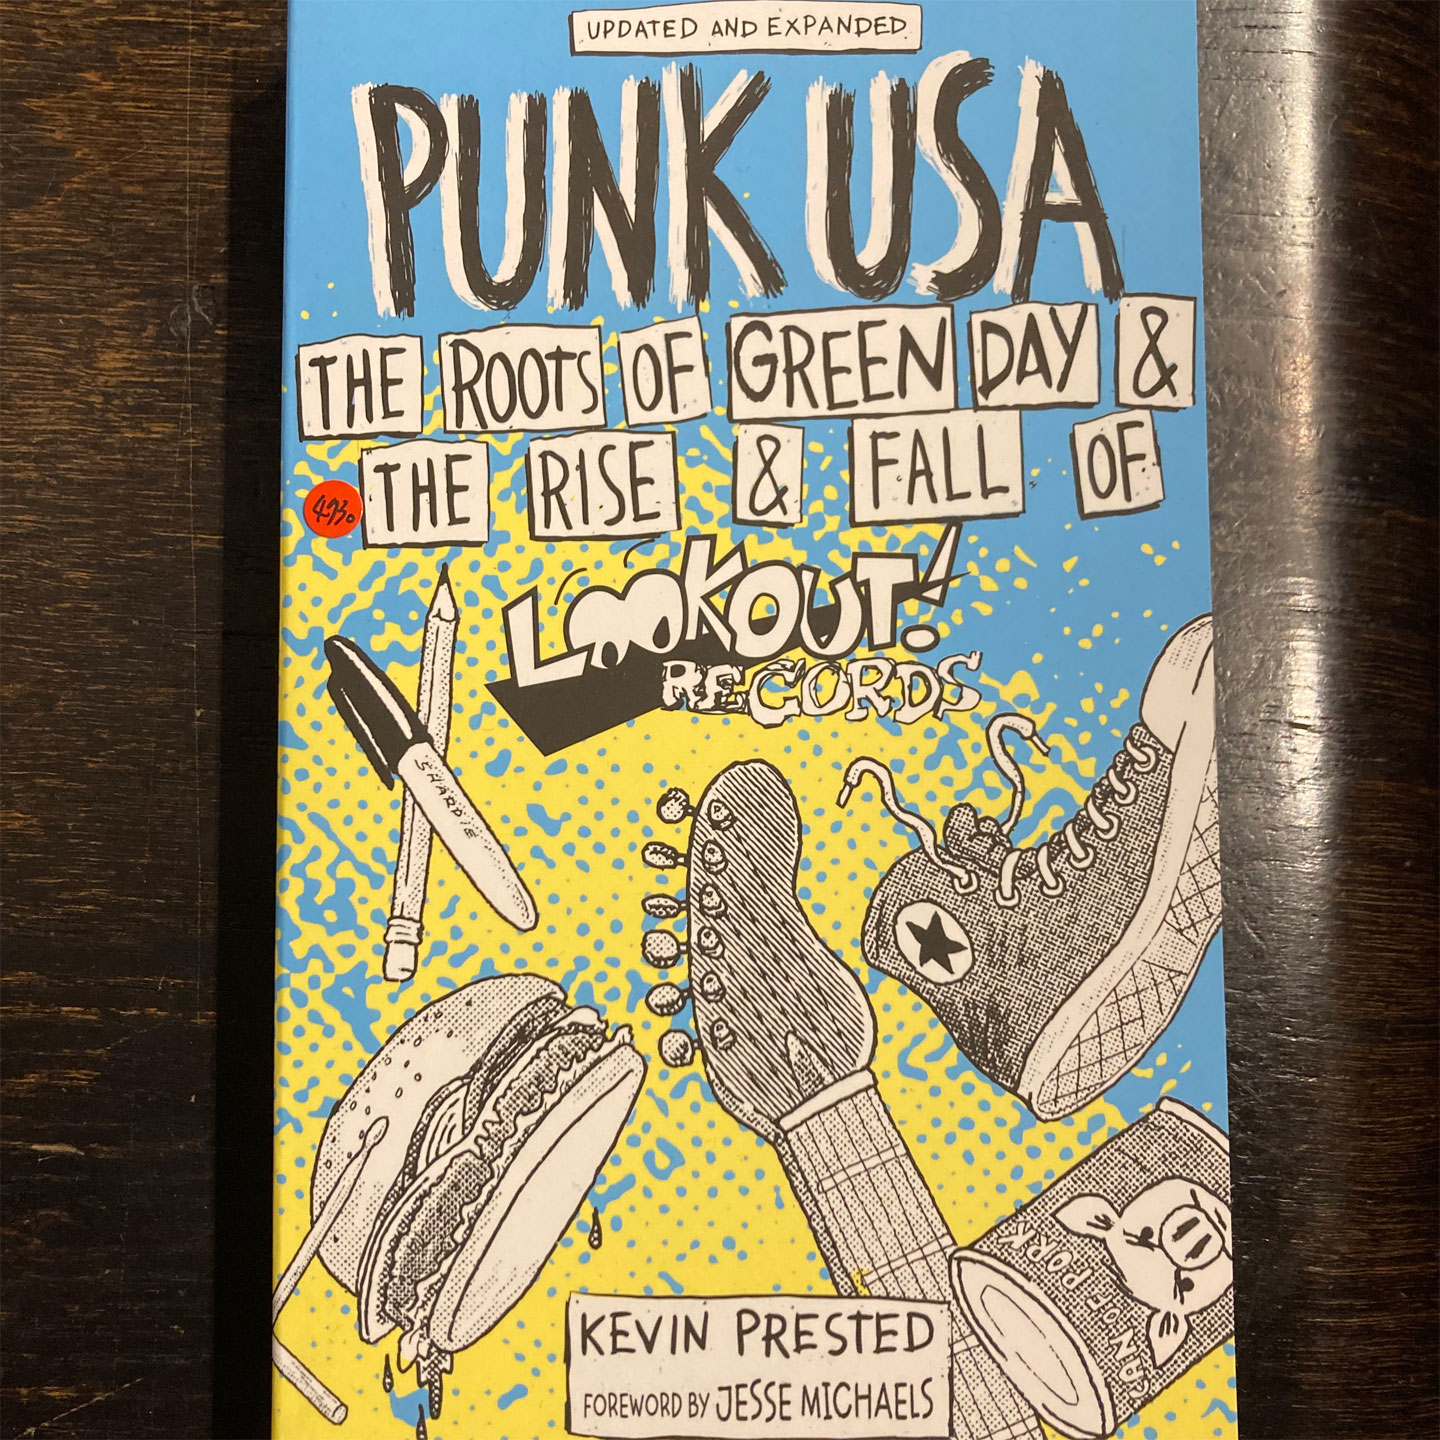 LOOKOUT! RECORDS BOOK PUNK USA